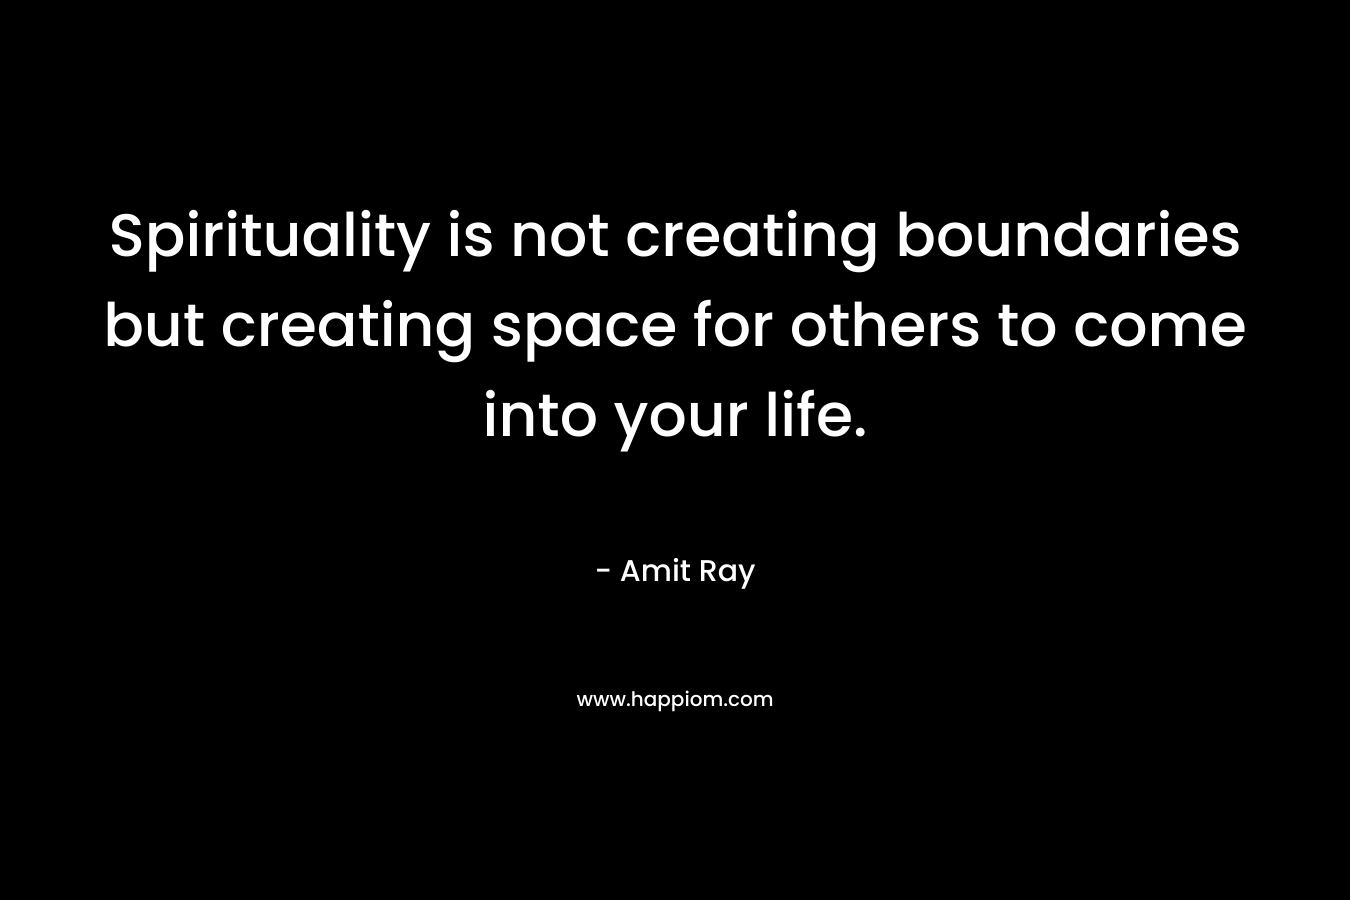 Spirituality is not creating boundaries but creating space for others to come into your life.